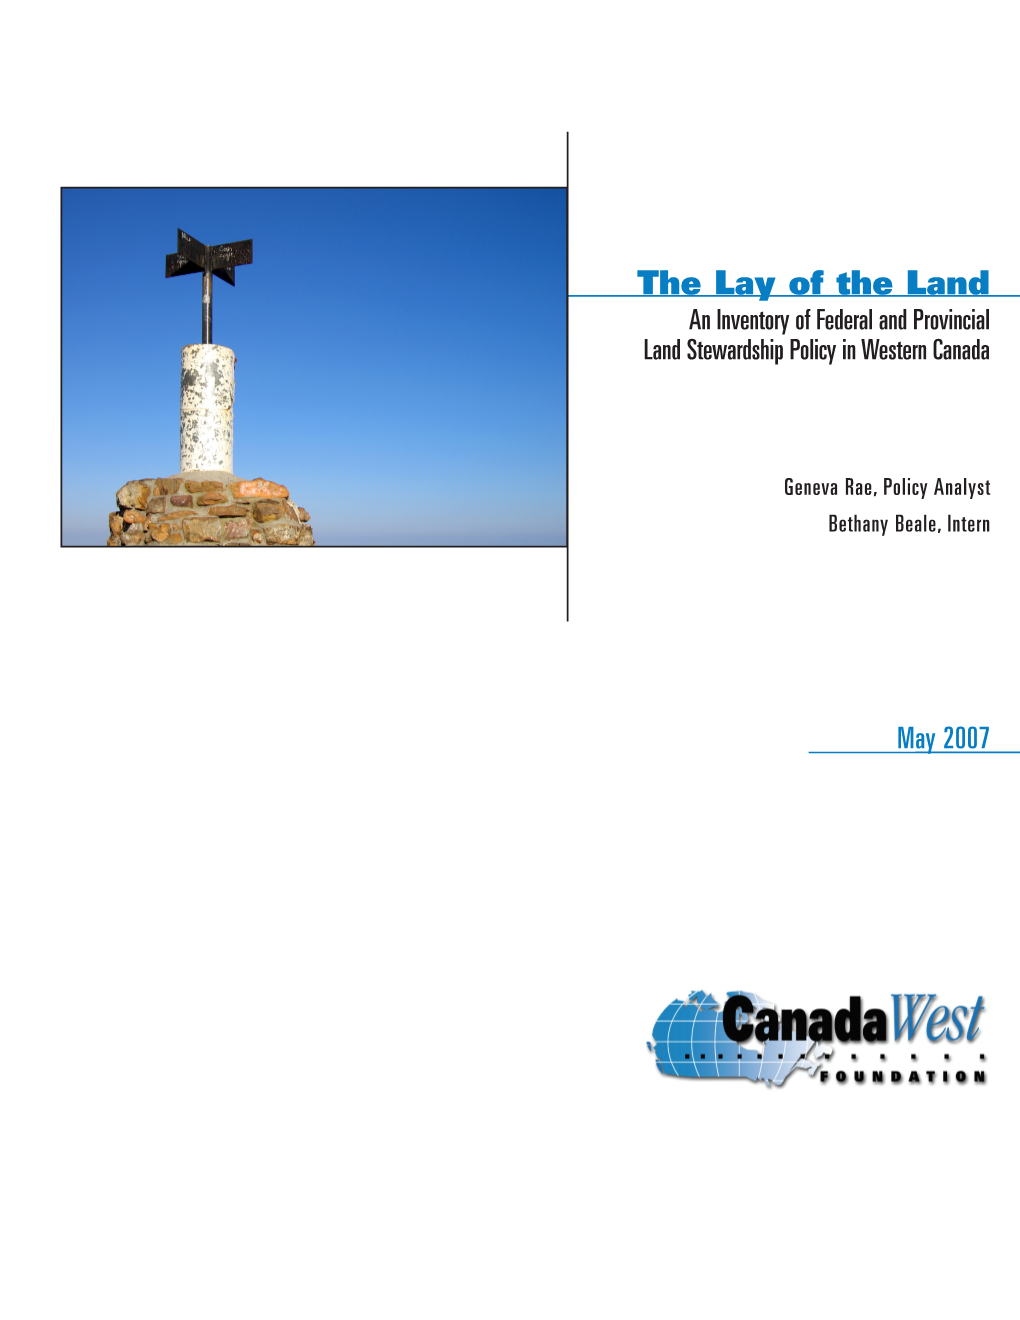 The Lay of the Land an Inventory of Federal and Provincial Land Stewardship Policy in Western Canada